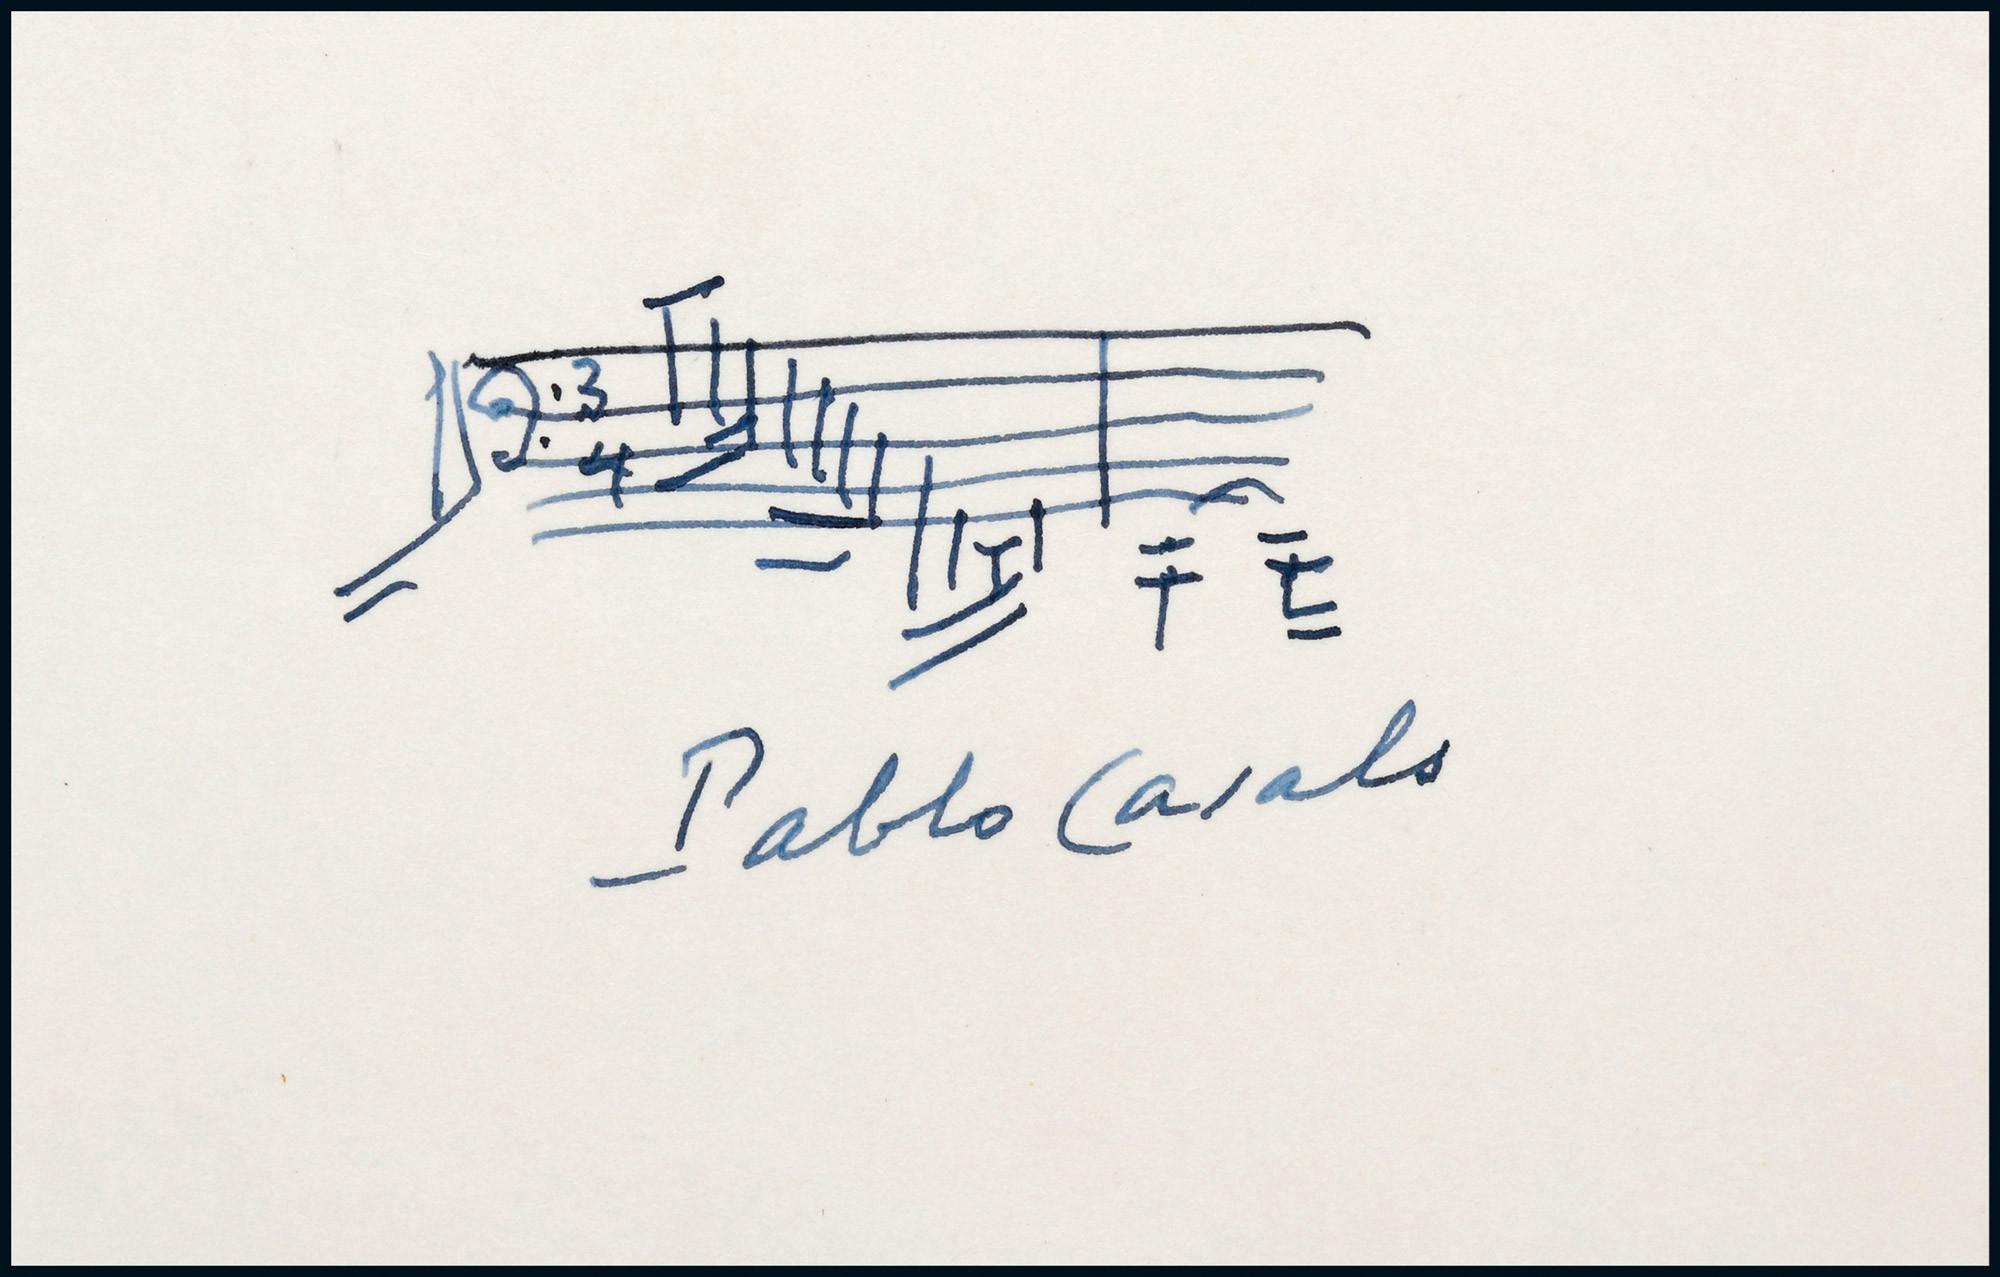 The handwritten score of Bach’s Cello Suite No. 3 in C major by Pablo Casals, the “Father of the Cello”, with certificate